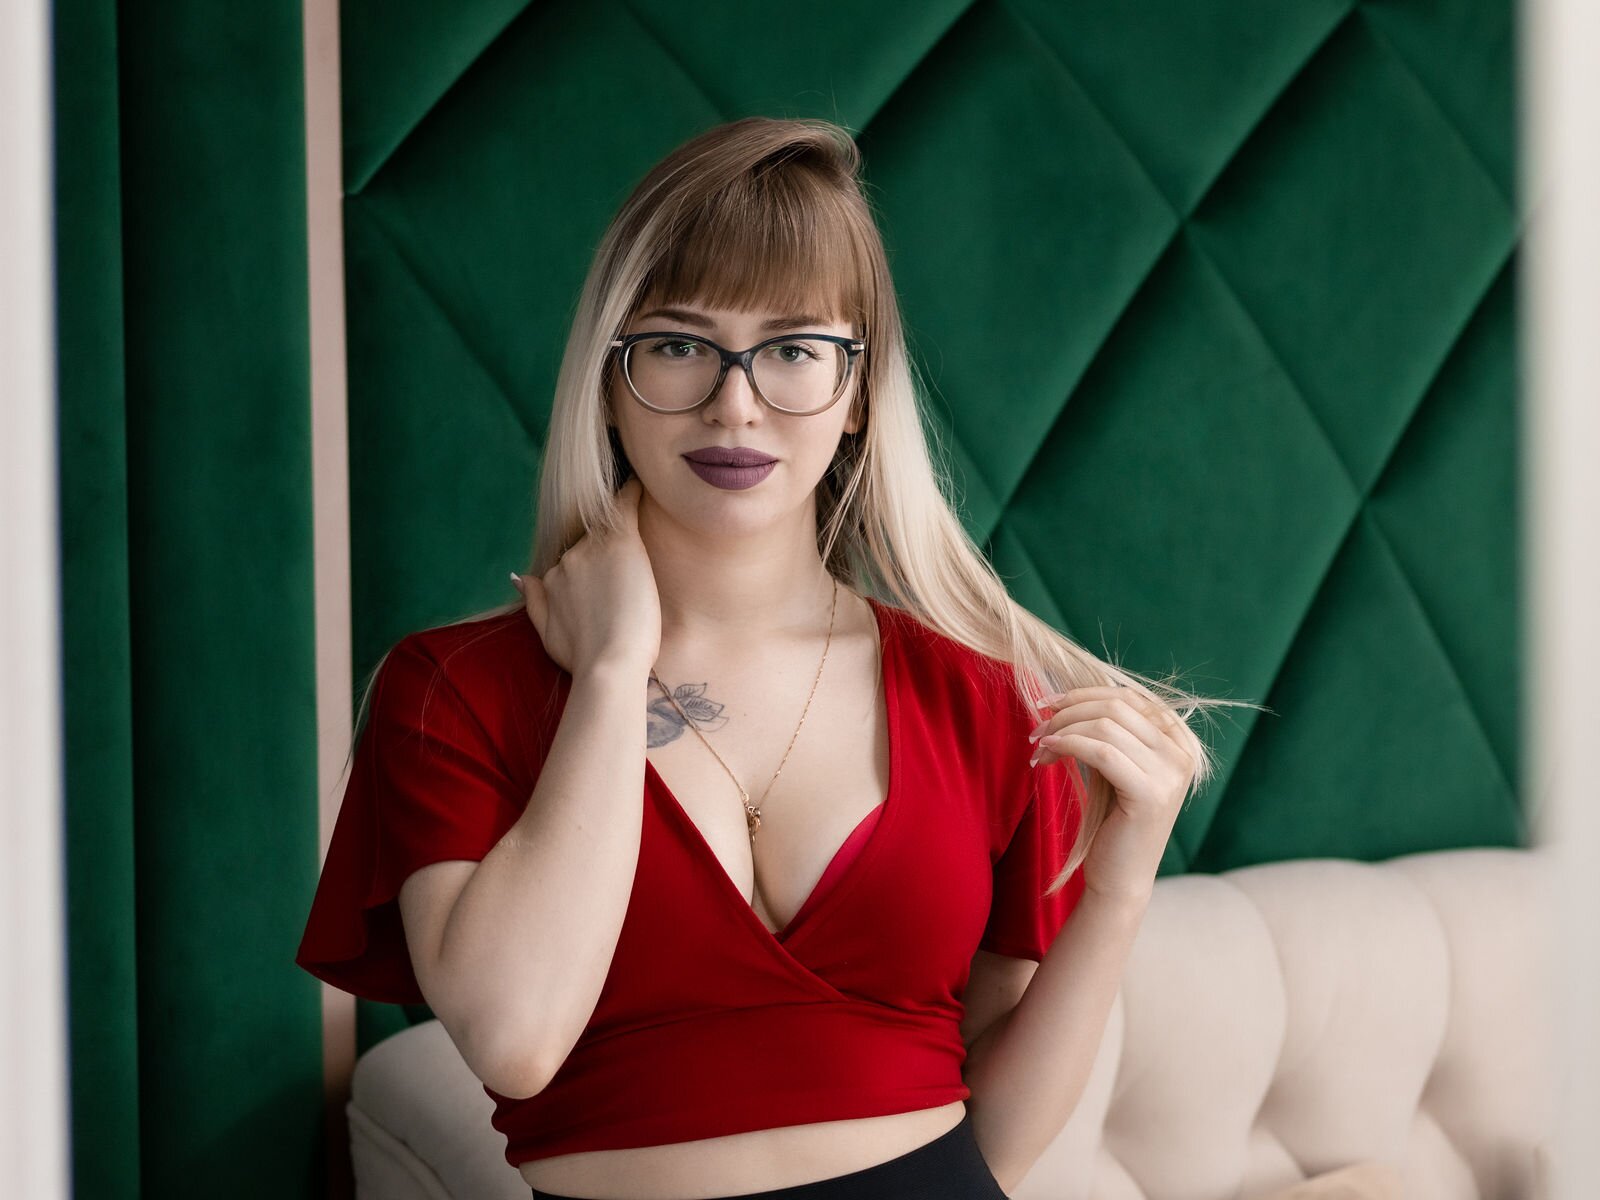 Free Live Sex Chat With MelodyMarling